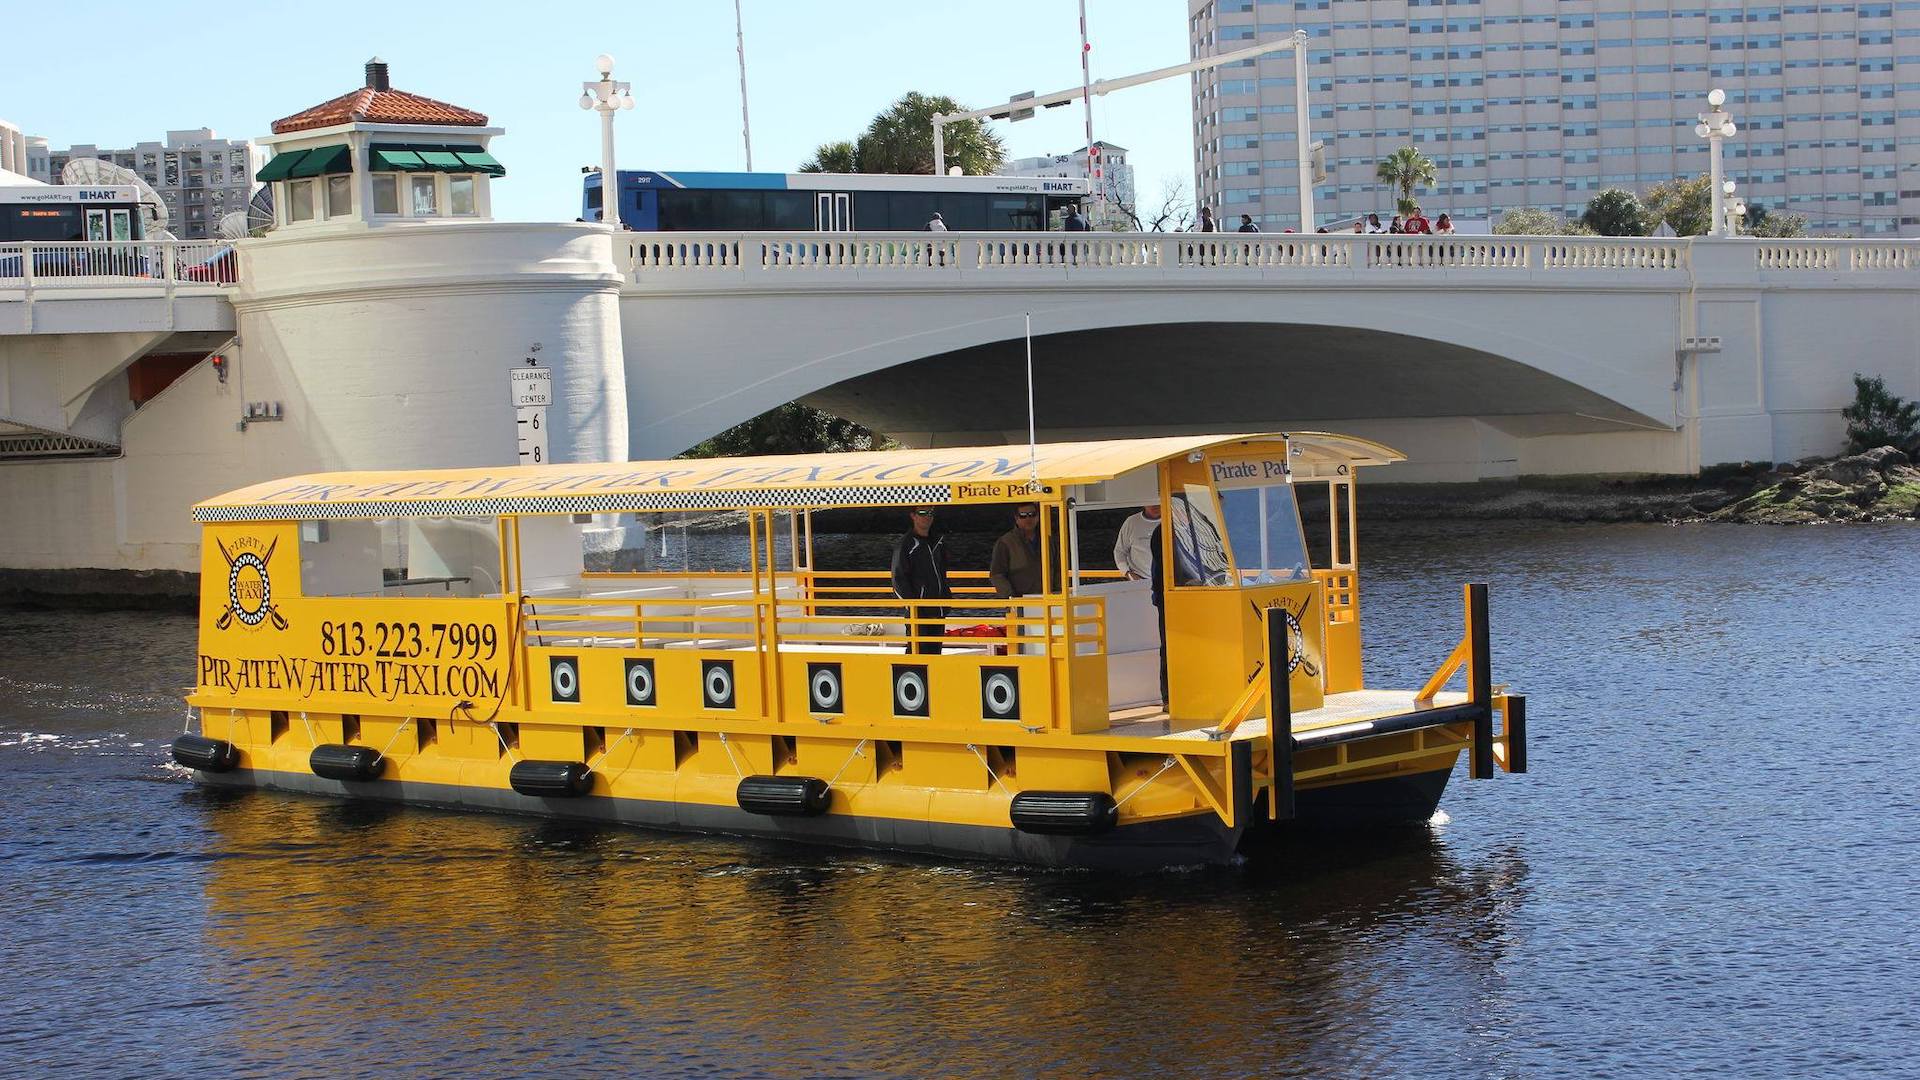 Pirate Water Taxi launching haunted river tours - That's So Tampa